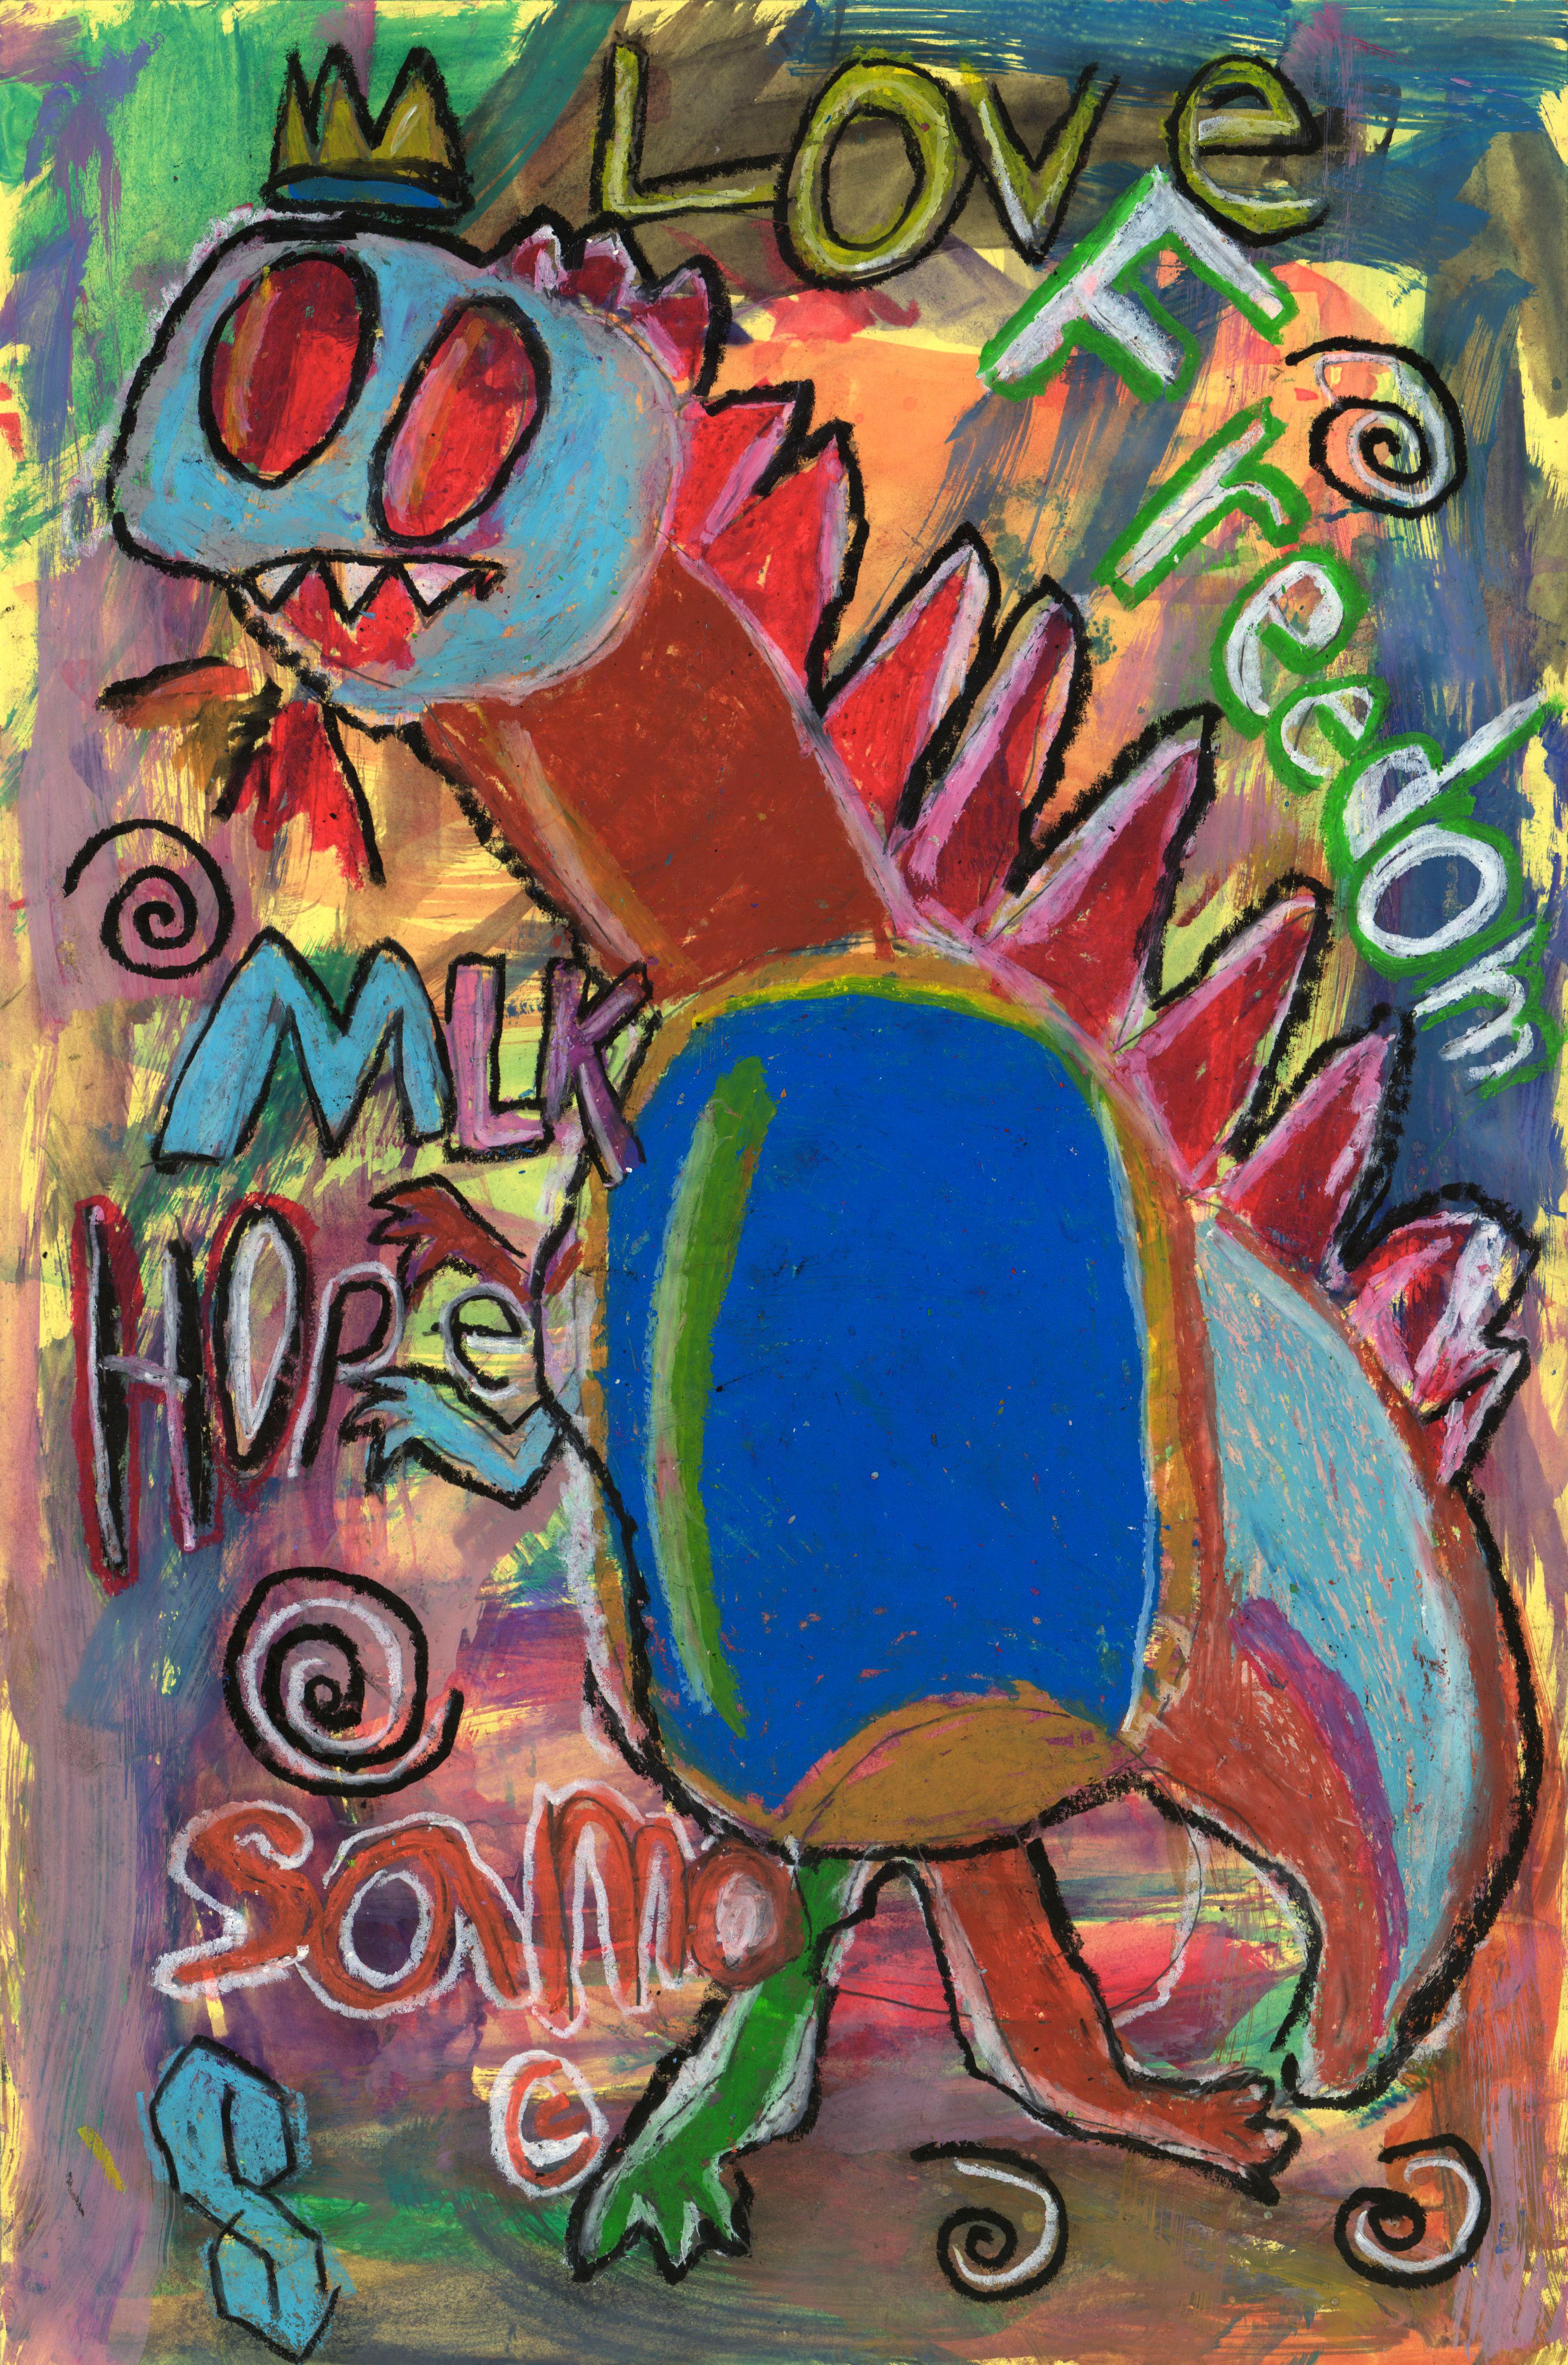 Paint-and–oil pastel illustration of Power Dino, a tall dinosaur standing on two legs, wearing a gold crown. Power Dino is facing left and has a light blue face, long brown neck, deep blue body, light blue tail, a small pair of upper arms, one light blue, the other brown, and a larger pair of lower legs, one green, the other brown. Power Dino has big red eyes, pointy teeth, and tall red spikes running along its spine. Written in the air around Power Dino are the words Love, Freedom, MLK, Hope, and Samo.